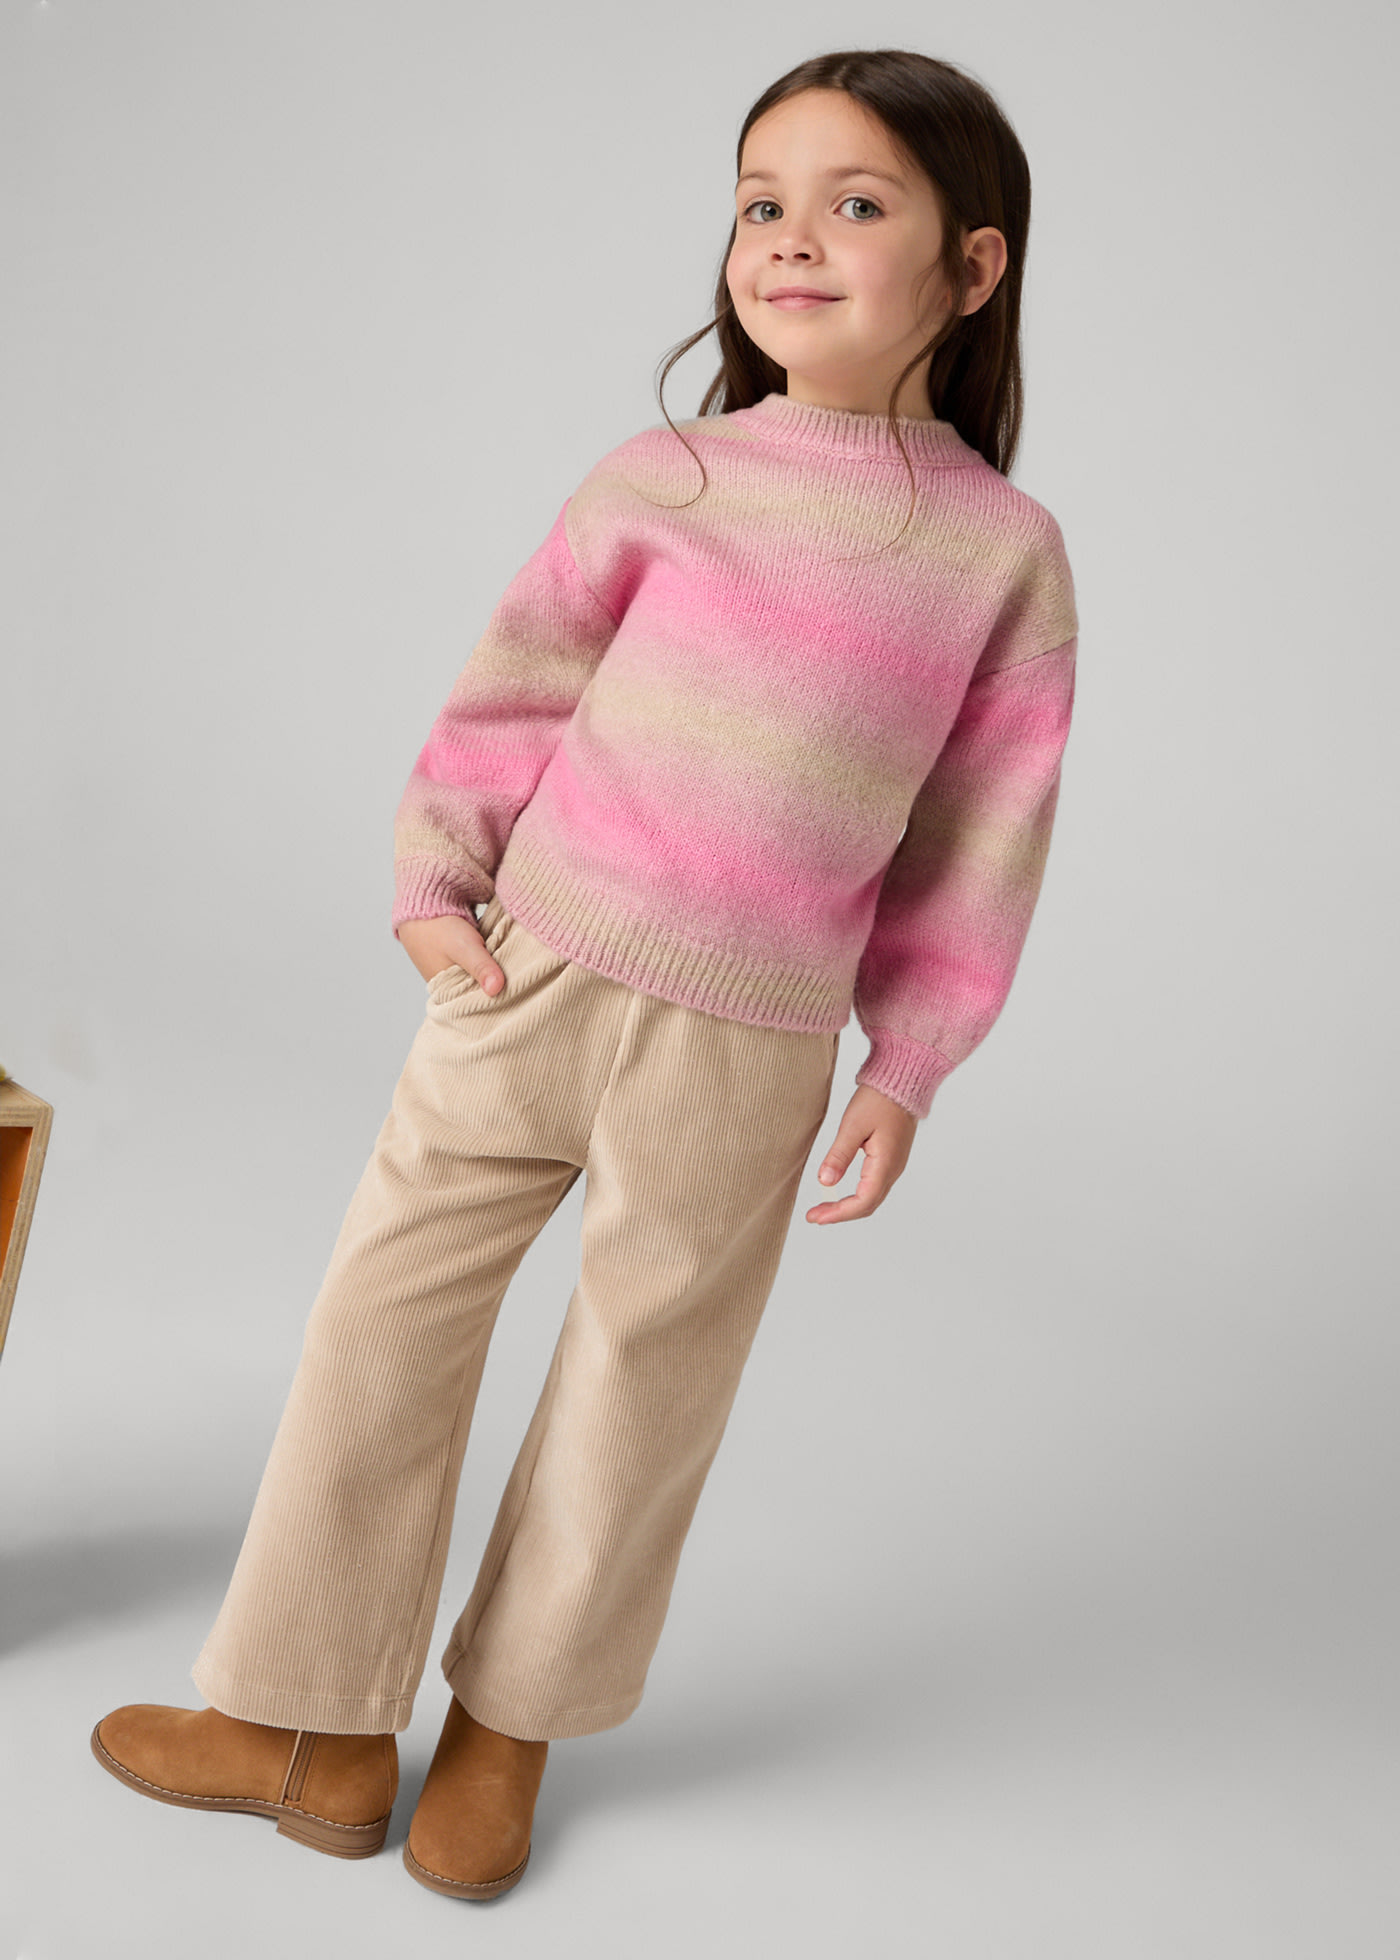 Corduroy flared pants for girls